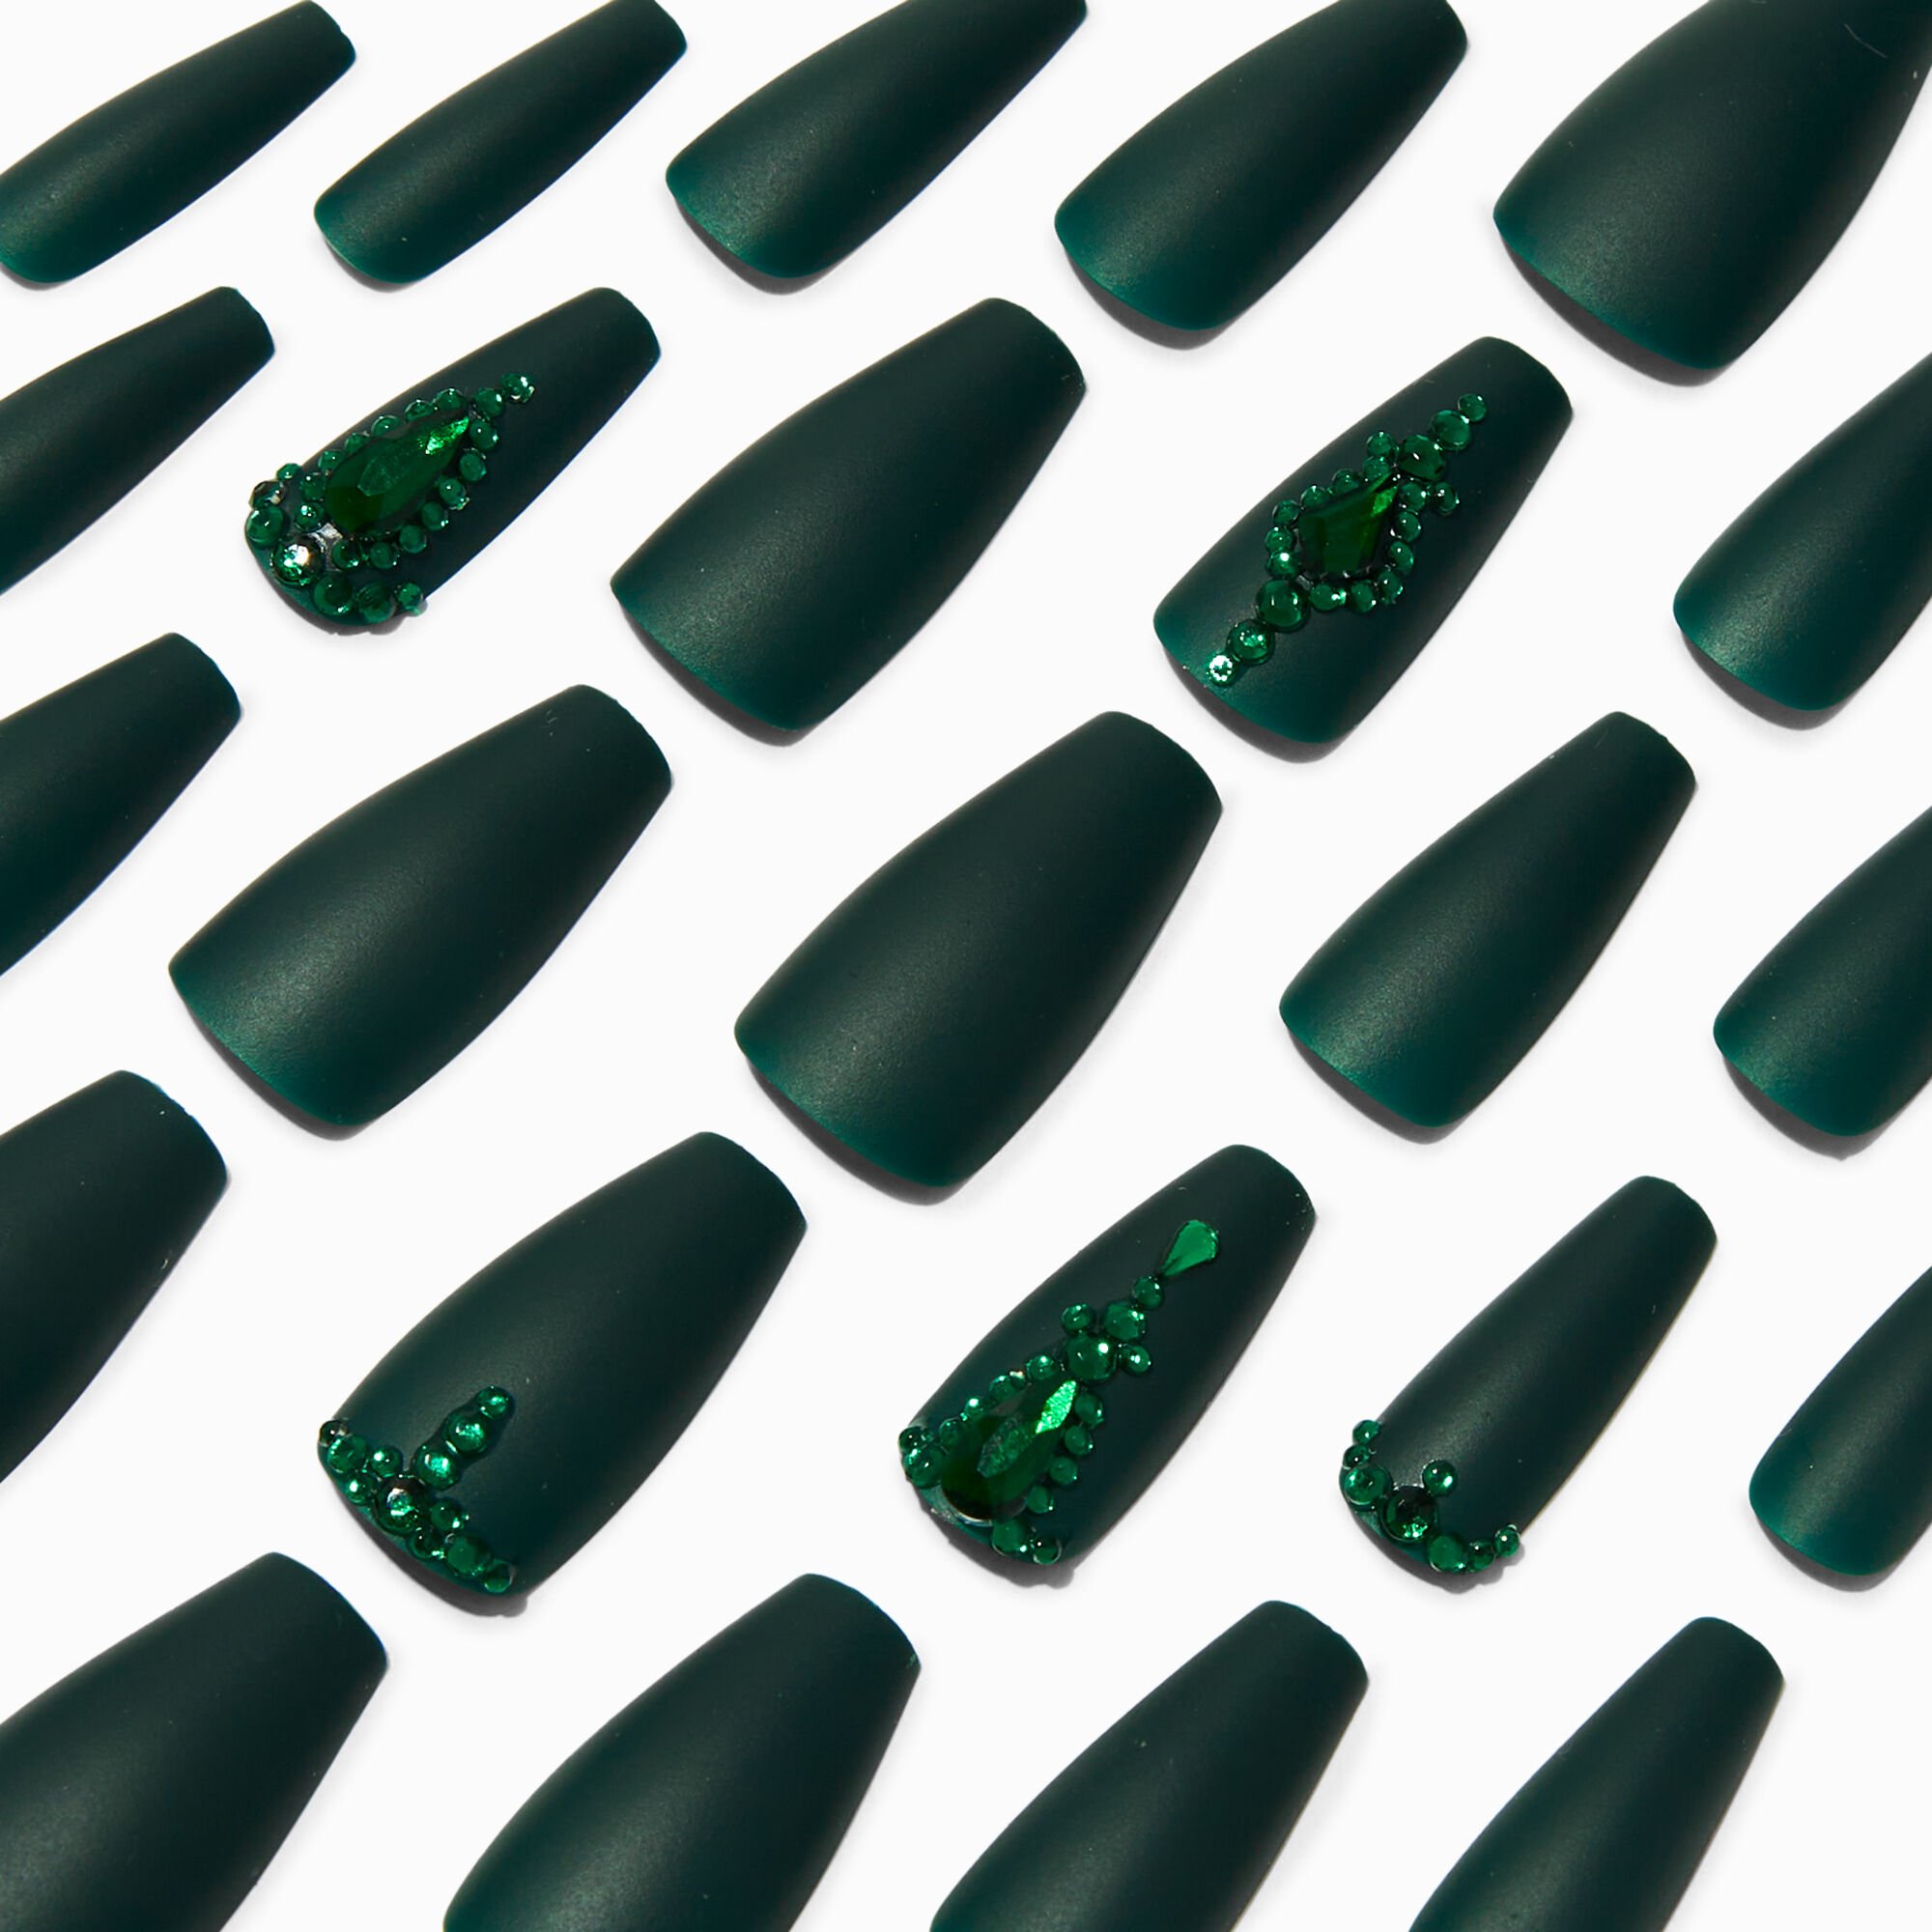 View Claires Bling Squareletto Vegan Faux Nail Set 24 Pack Green information